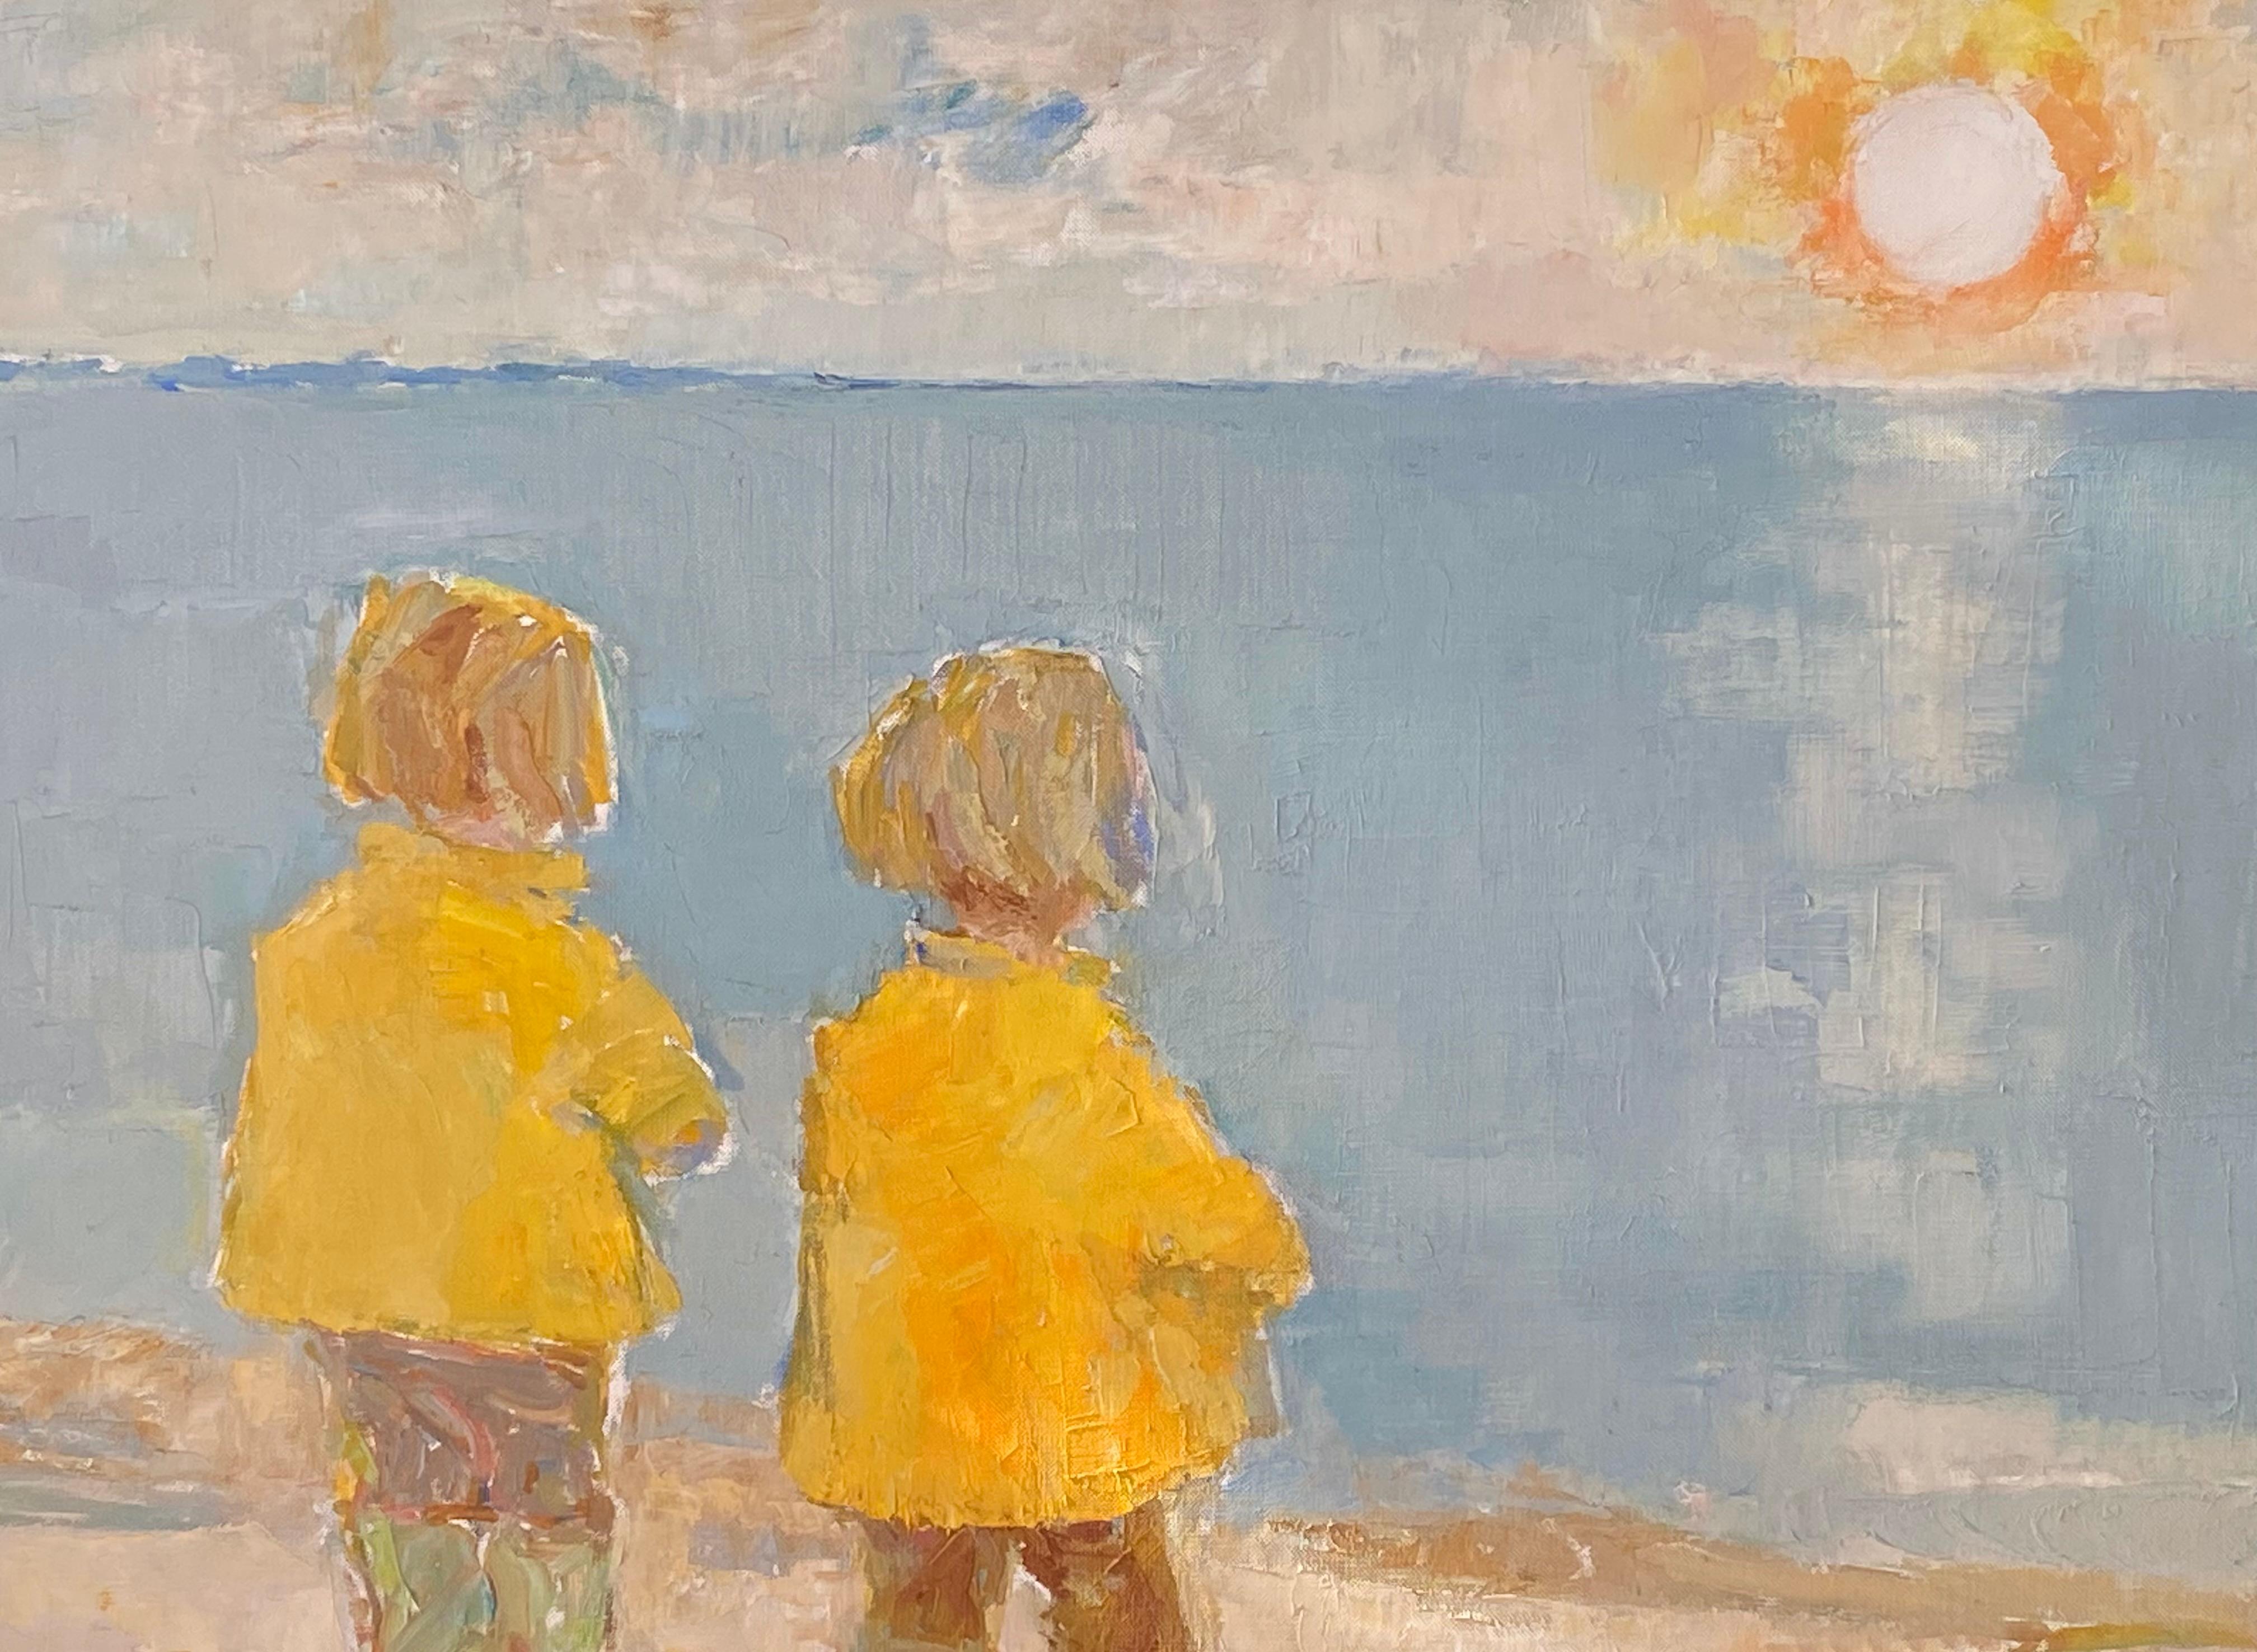 Oil on canvas painting by the Polish born artist, Ernest Kosmowski.  The painting is done with palette knife and brush typical of his style and children theme in the 1960’s. Two young children dressed in yellow at the beach watching a blue boat